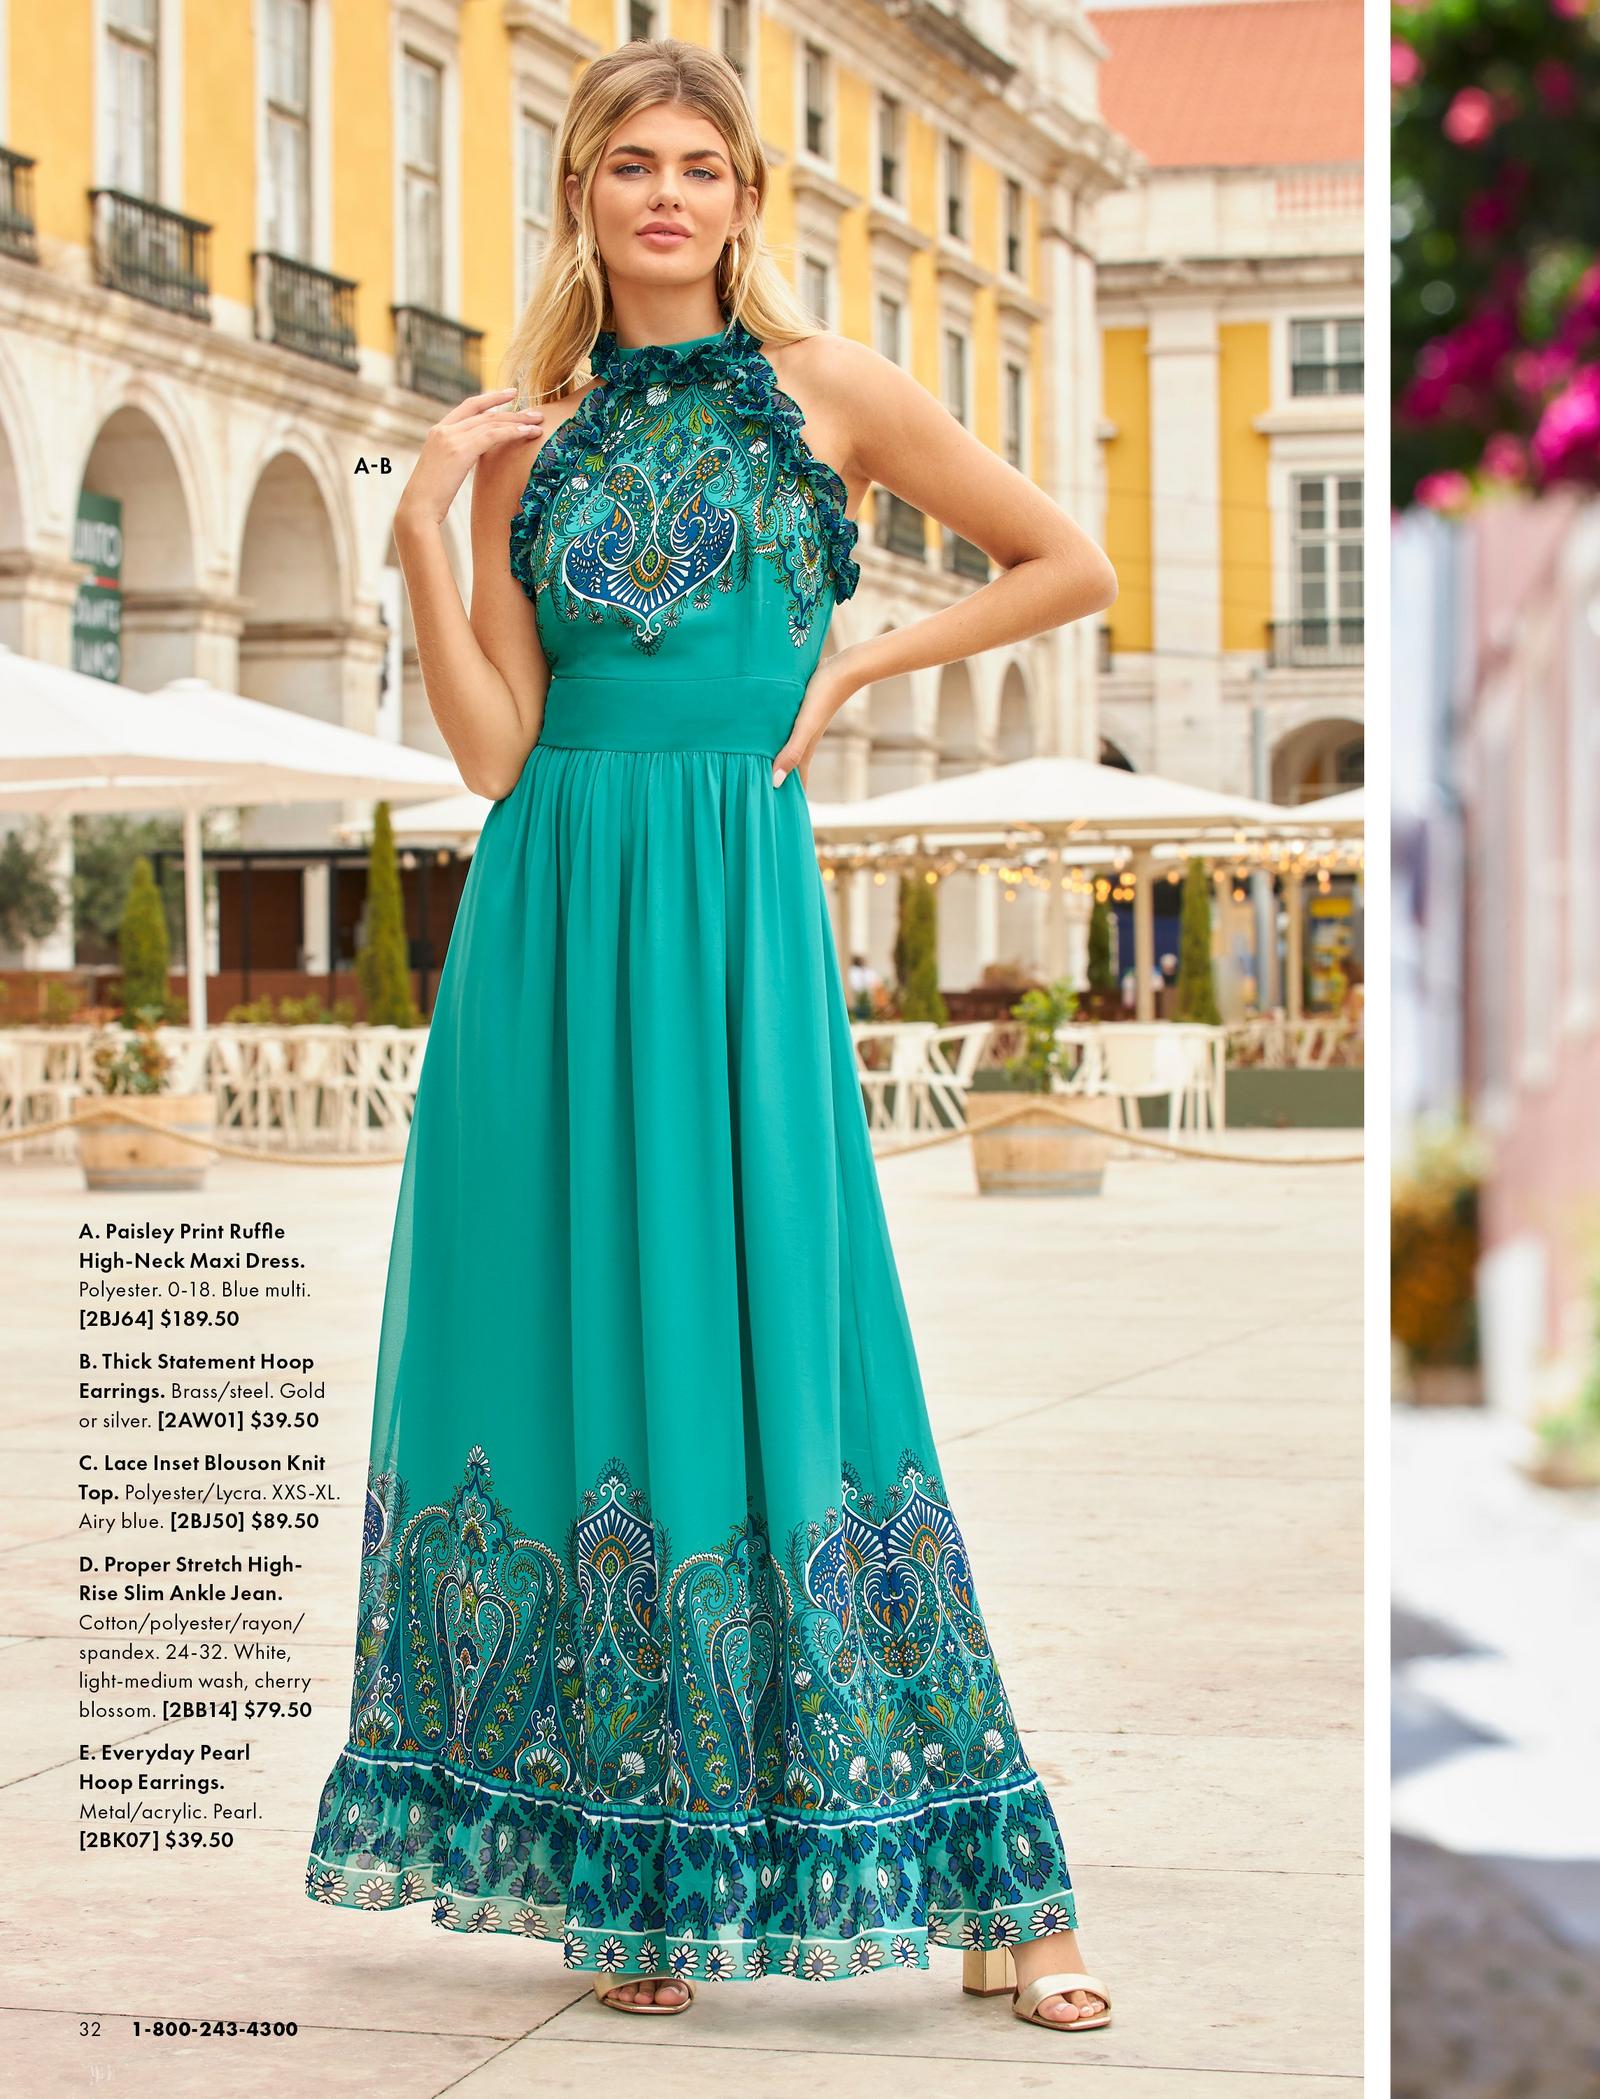 model wearing a blue-green paisley printed high-neck maxi dress and silver hoop earrings.